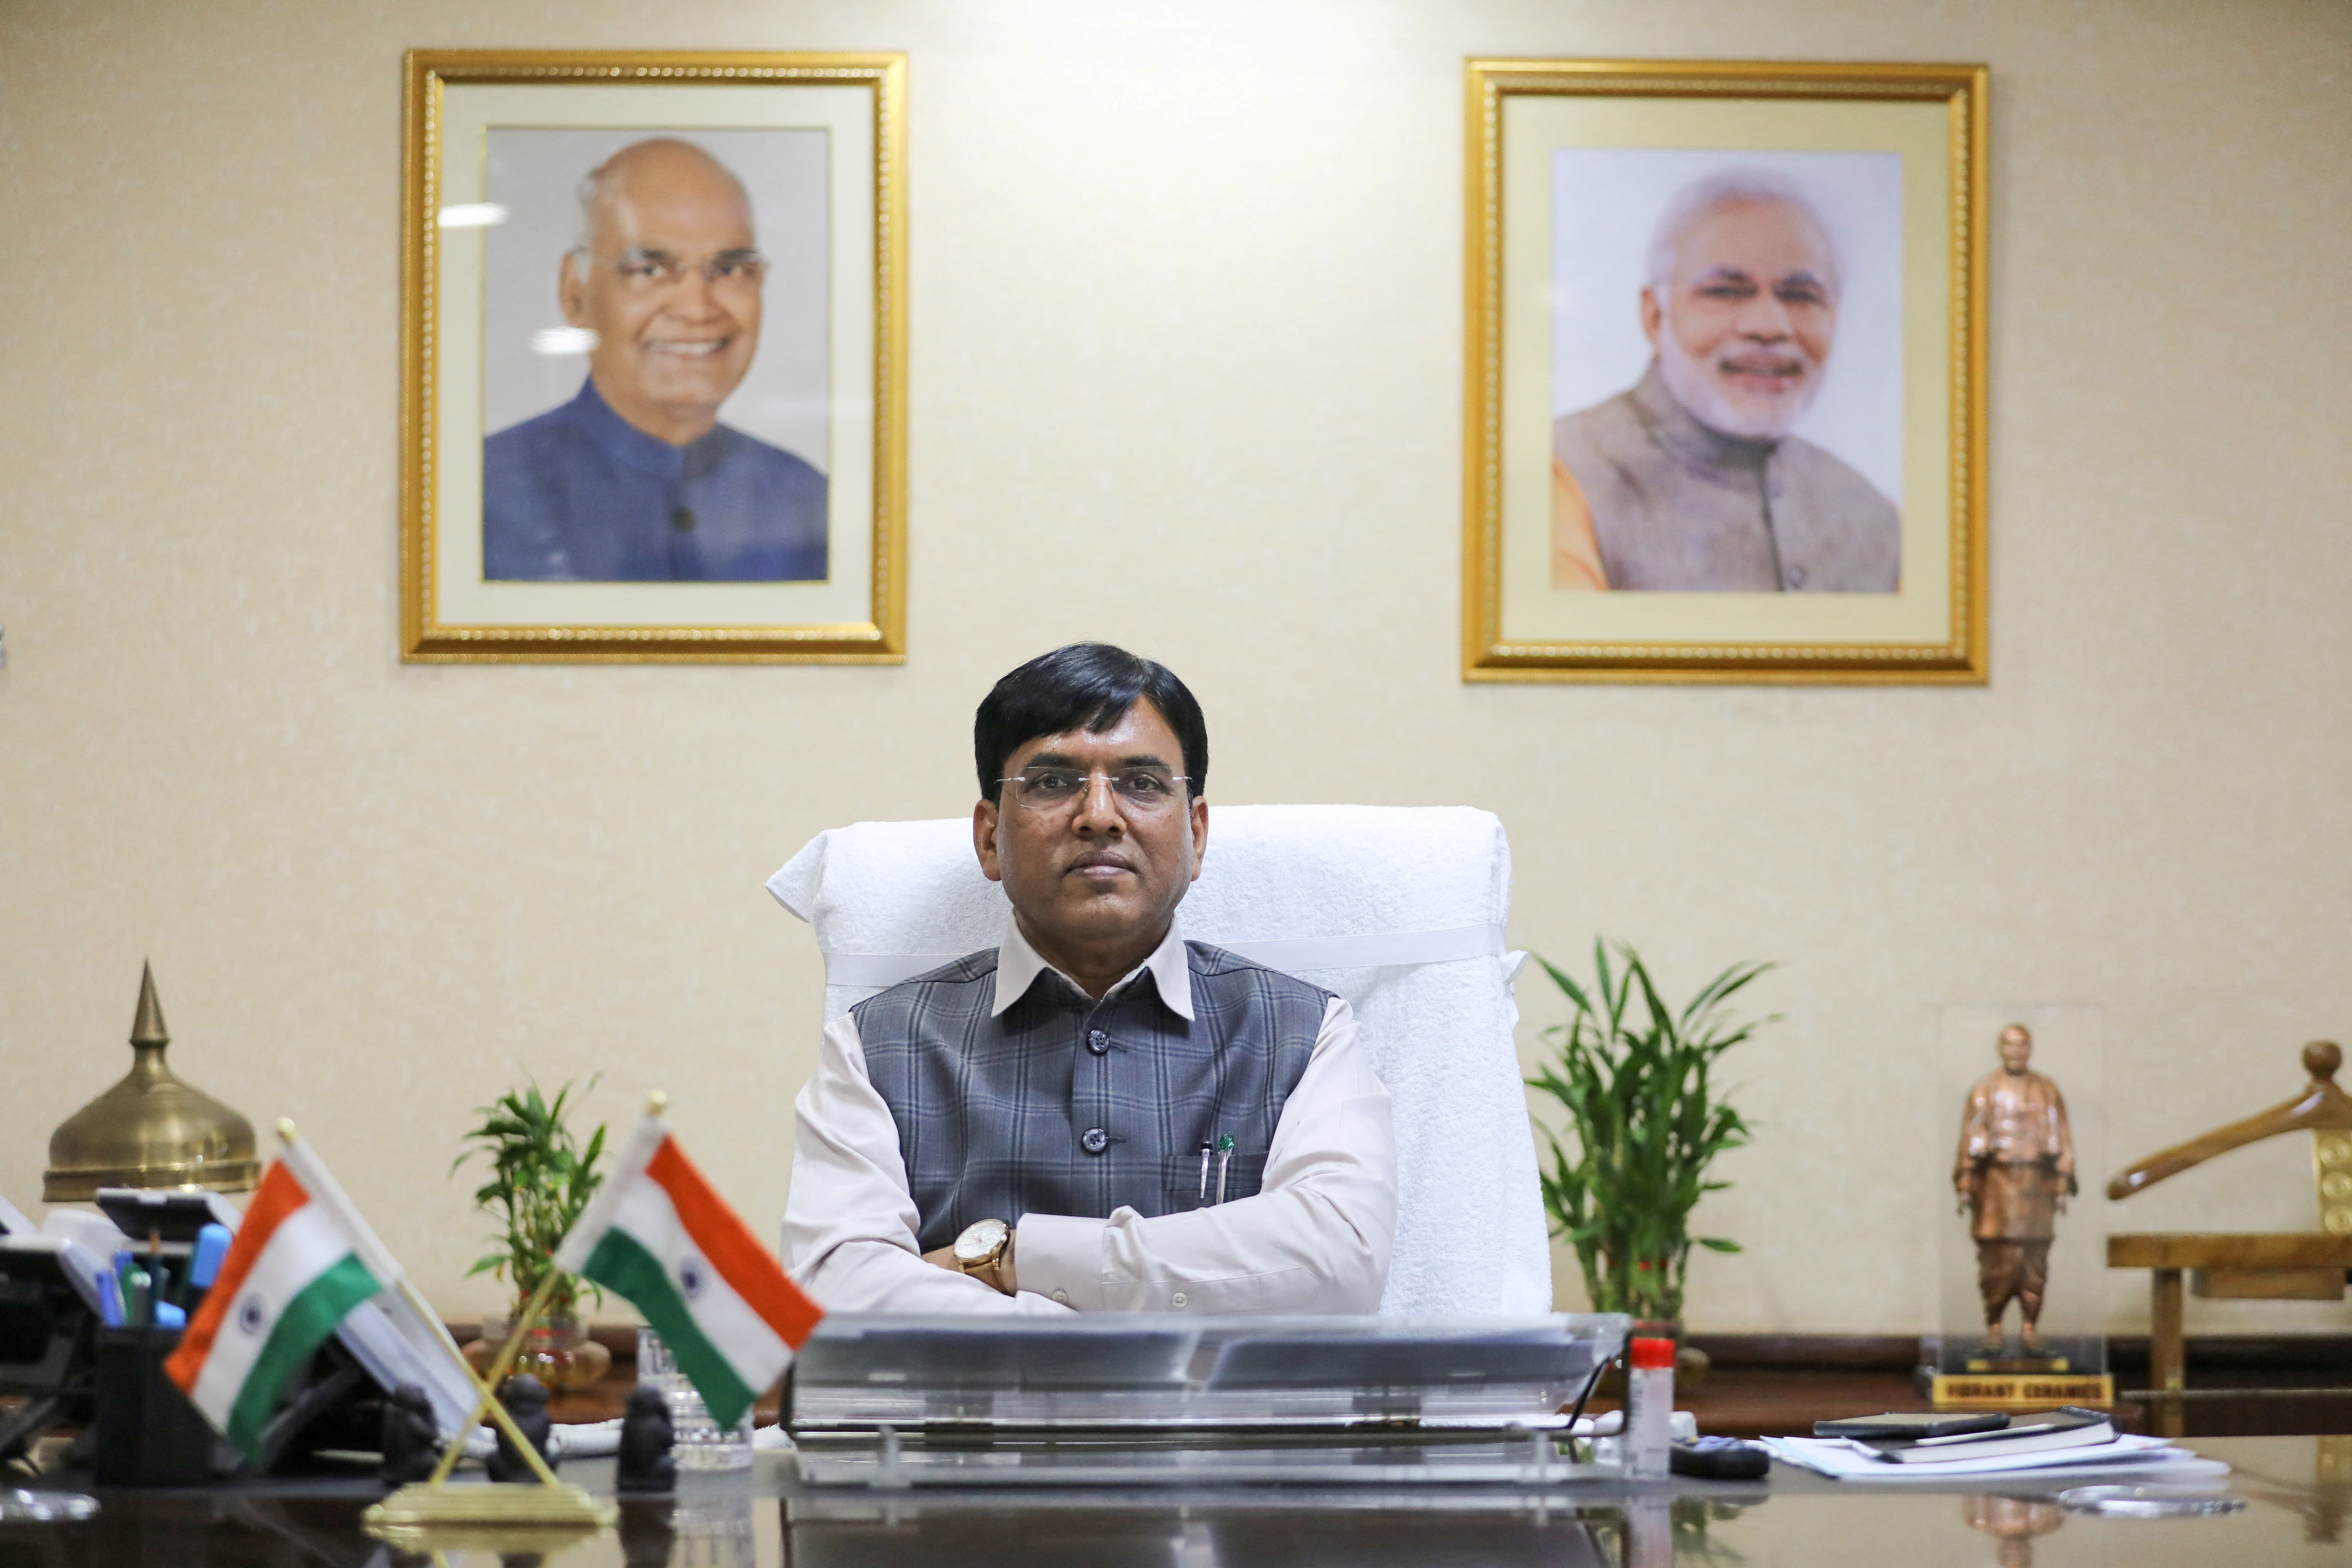 Minister Mansukh Mandaviya poses for a picture after his interview with Reuters, in New Delhi